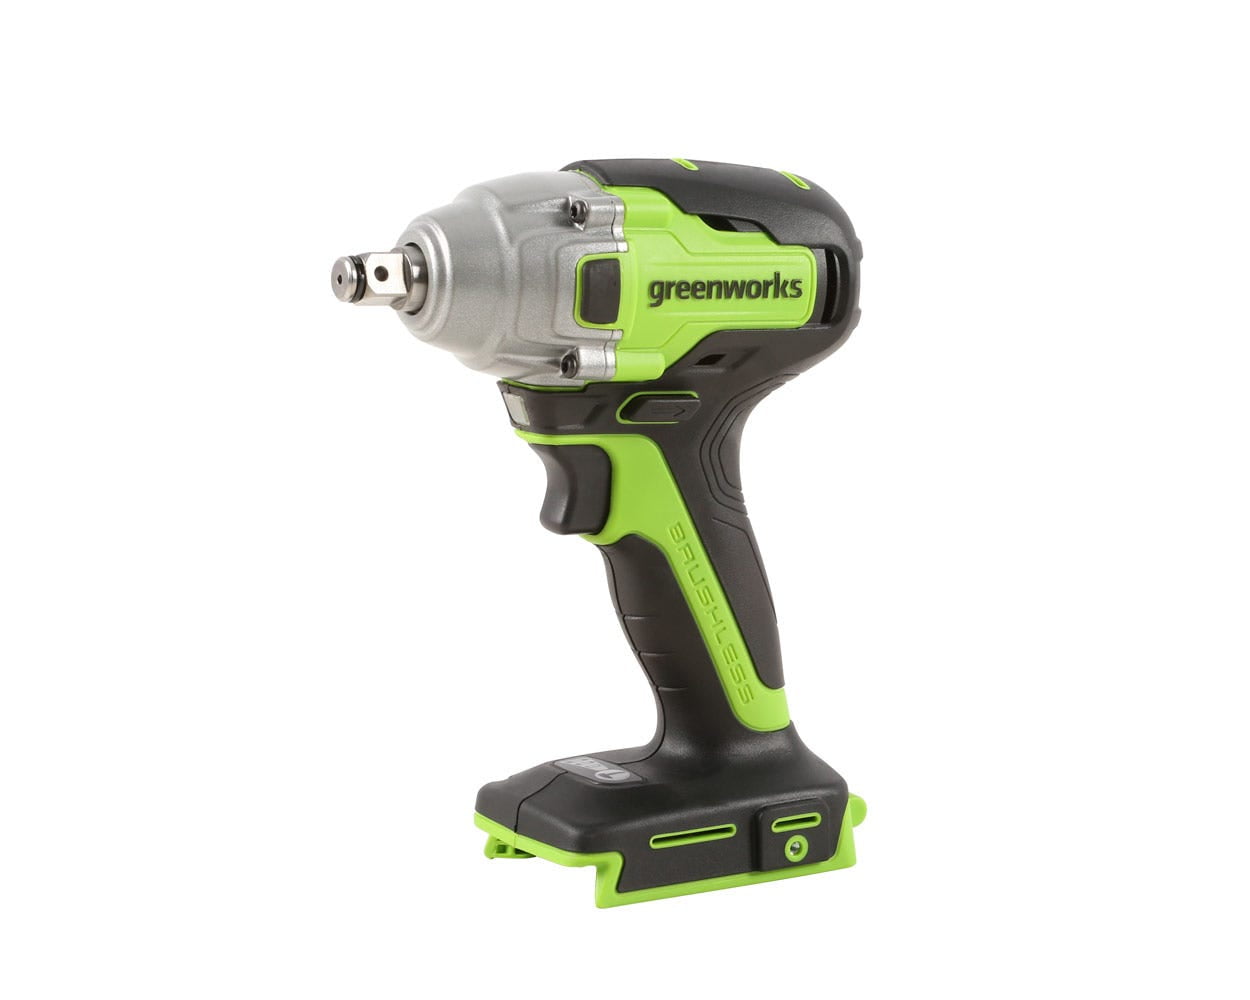 Battery and charger not included 3801507 Greenworks 24V Cordless Brushless Impact Wrench 